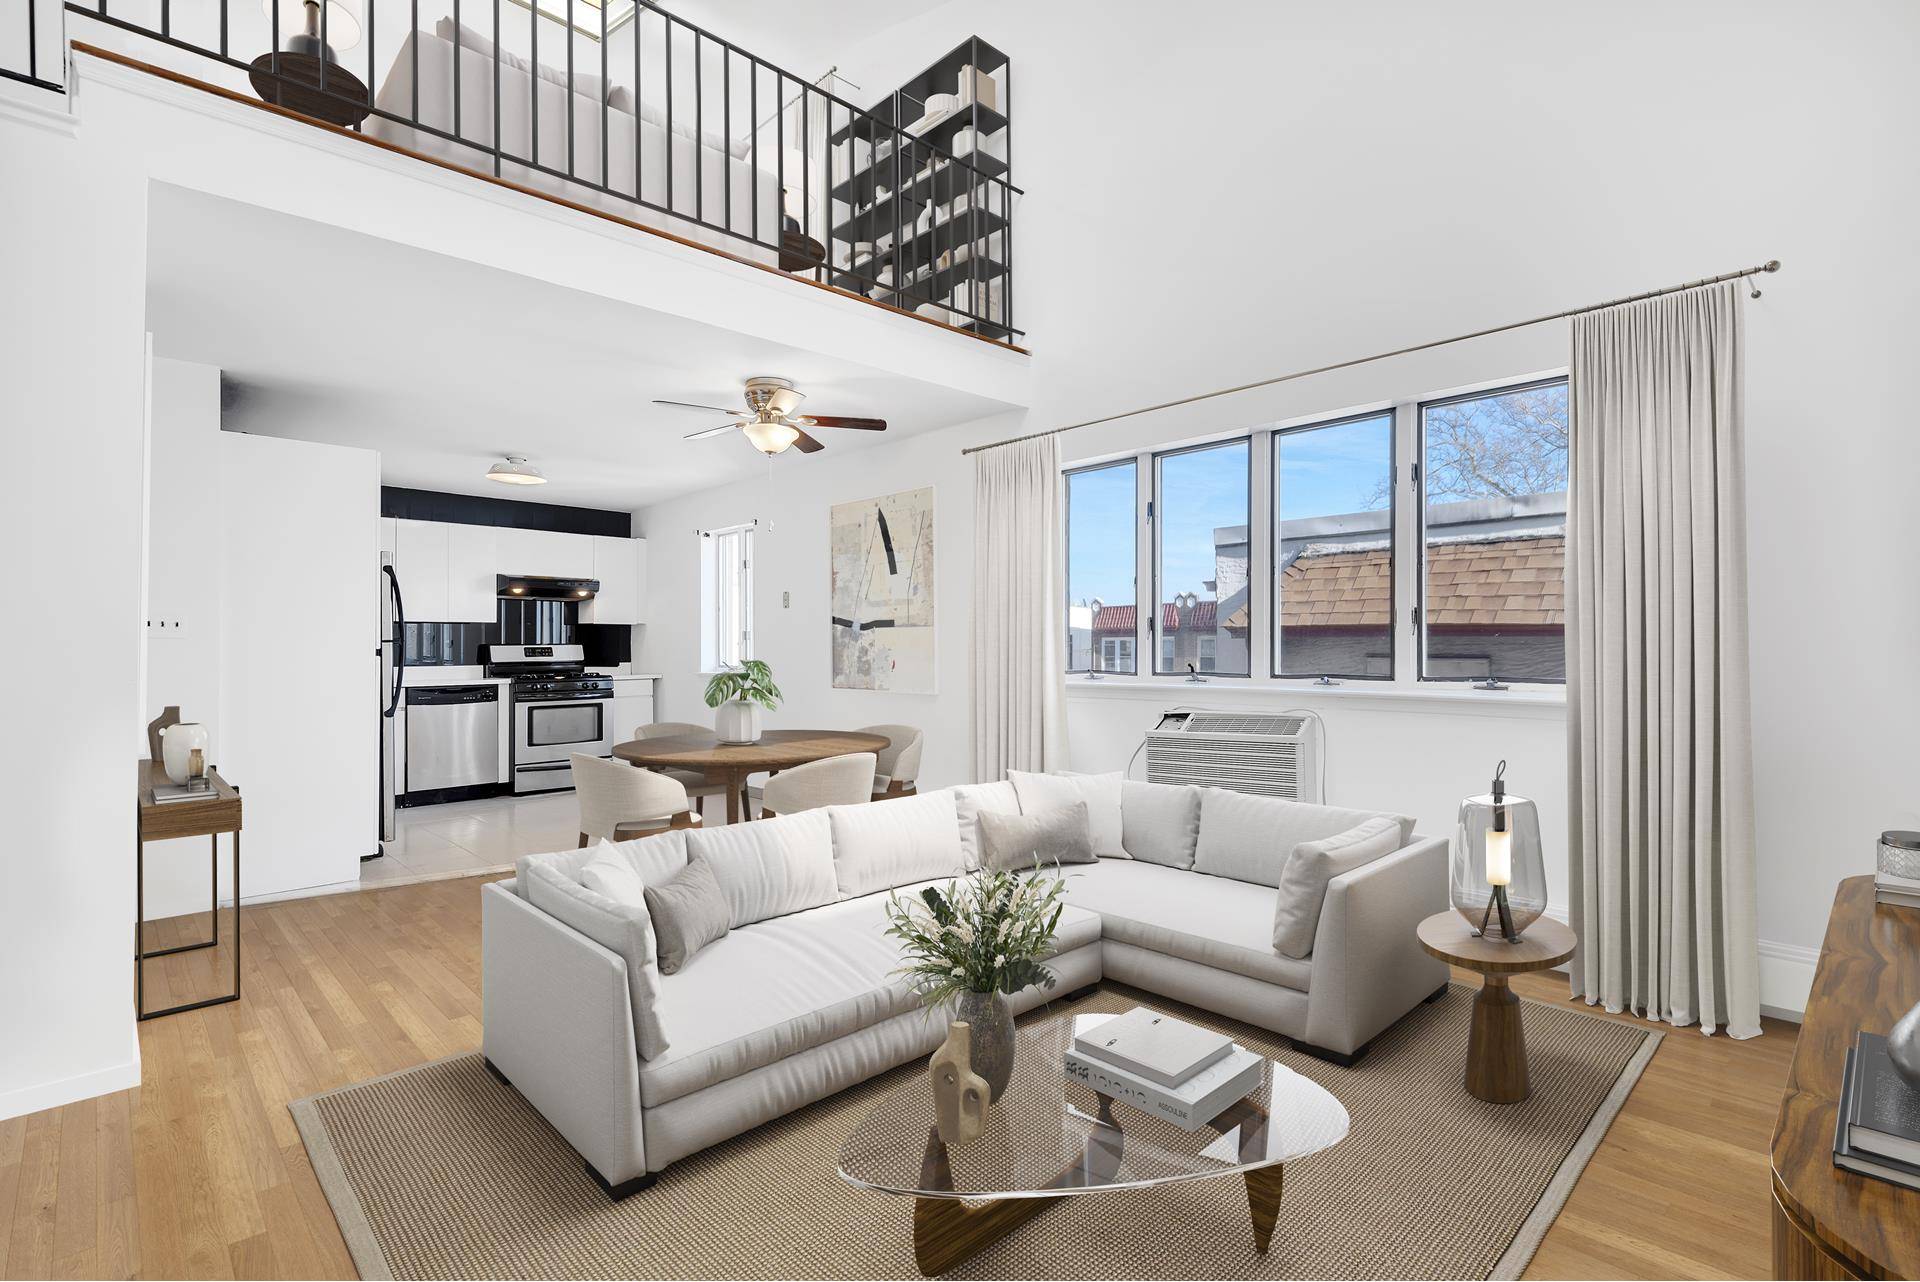 Penthouse Living ! Welcome home to this lofty, 2 bedroom, 2 bathroom, plus loft top floor condominium residence situated comfortably and conveniently in Brooklyn's highly desirable Dyker Heights.